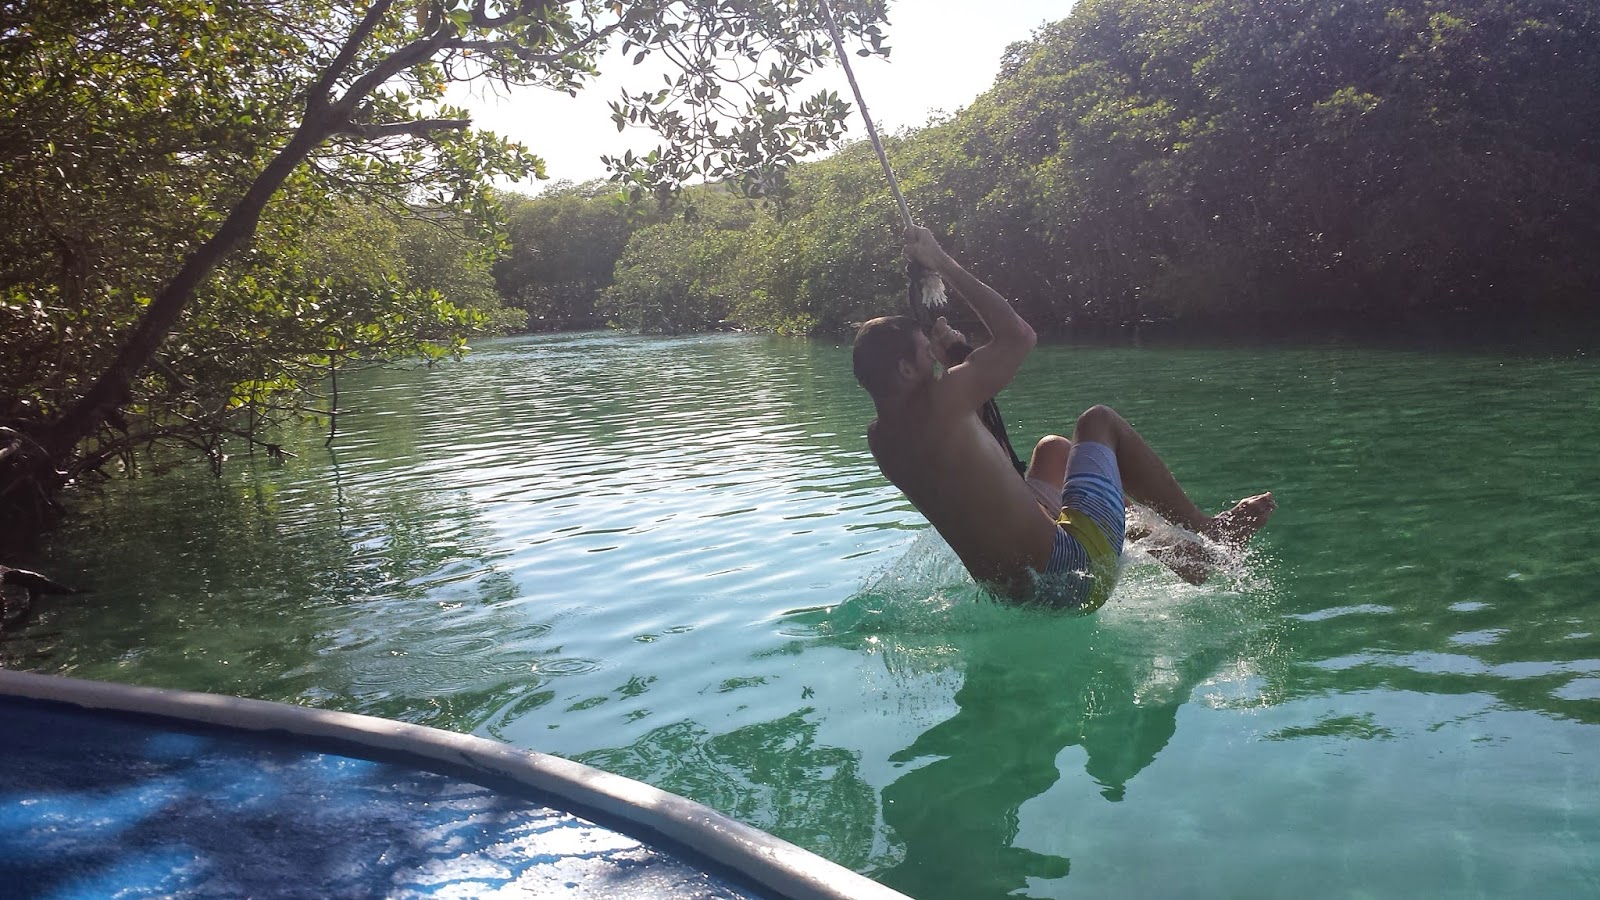 Remaxvipbelize: Swing from a rope in the trees